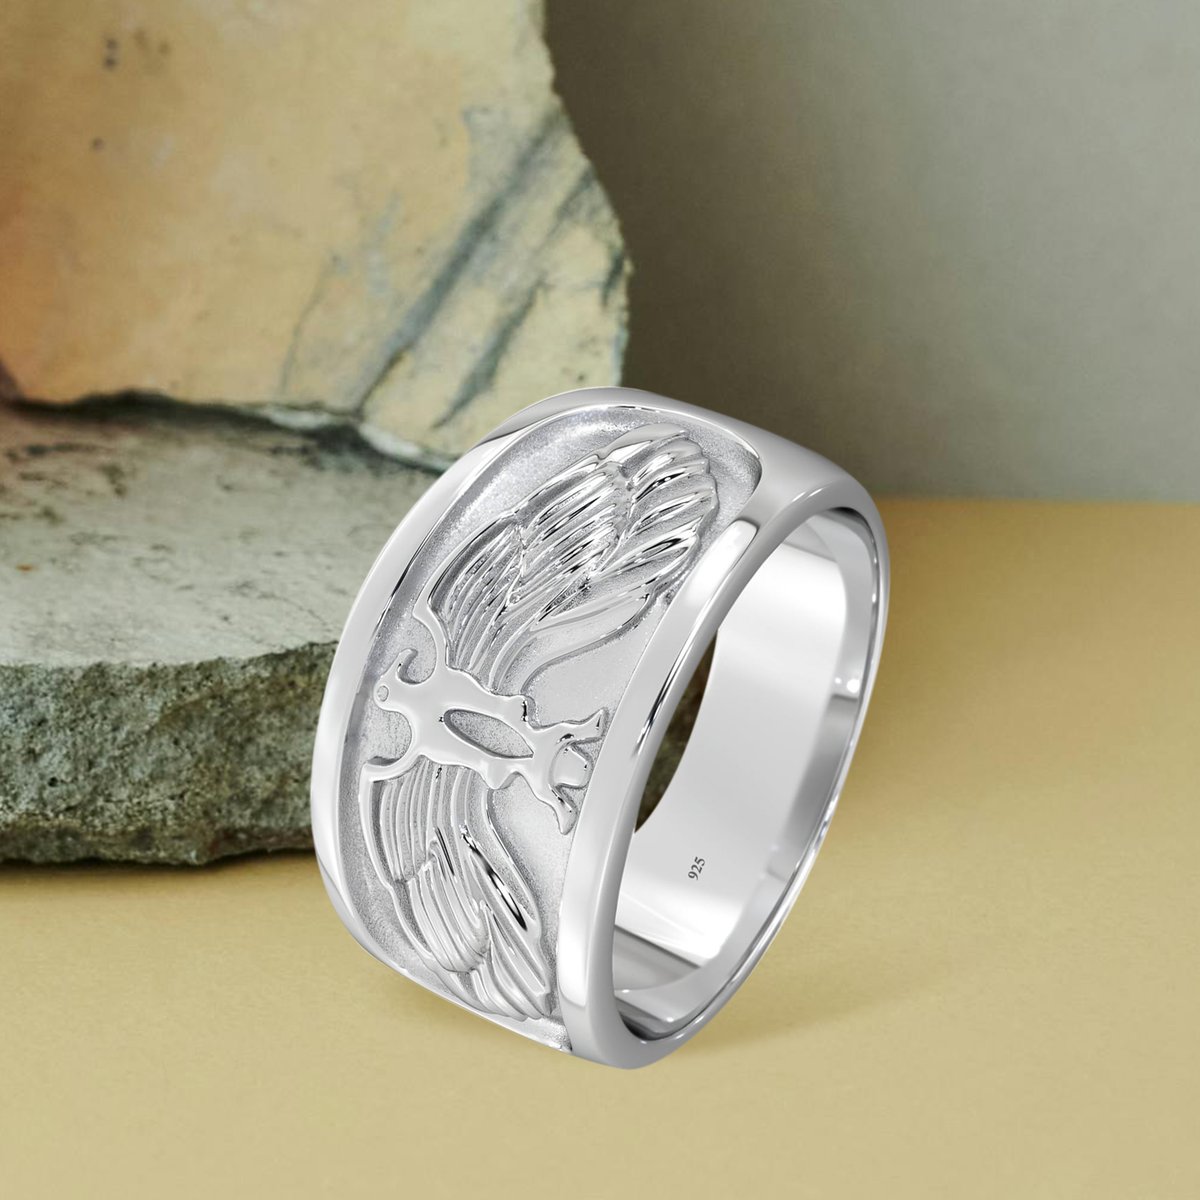 He will always say YES to a ring like this 💙🦅 Code: 296 Shop here: bit.ly/2TNqF3c #ExceptionalCraftsmanship #DistinctiveDesign #SymbolicBeauty #MensJewelry